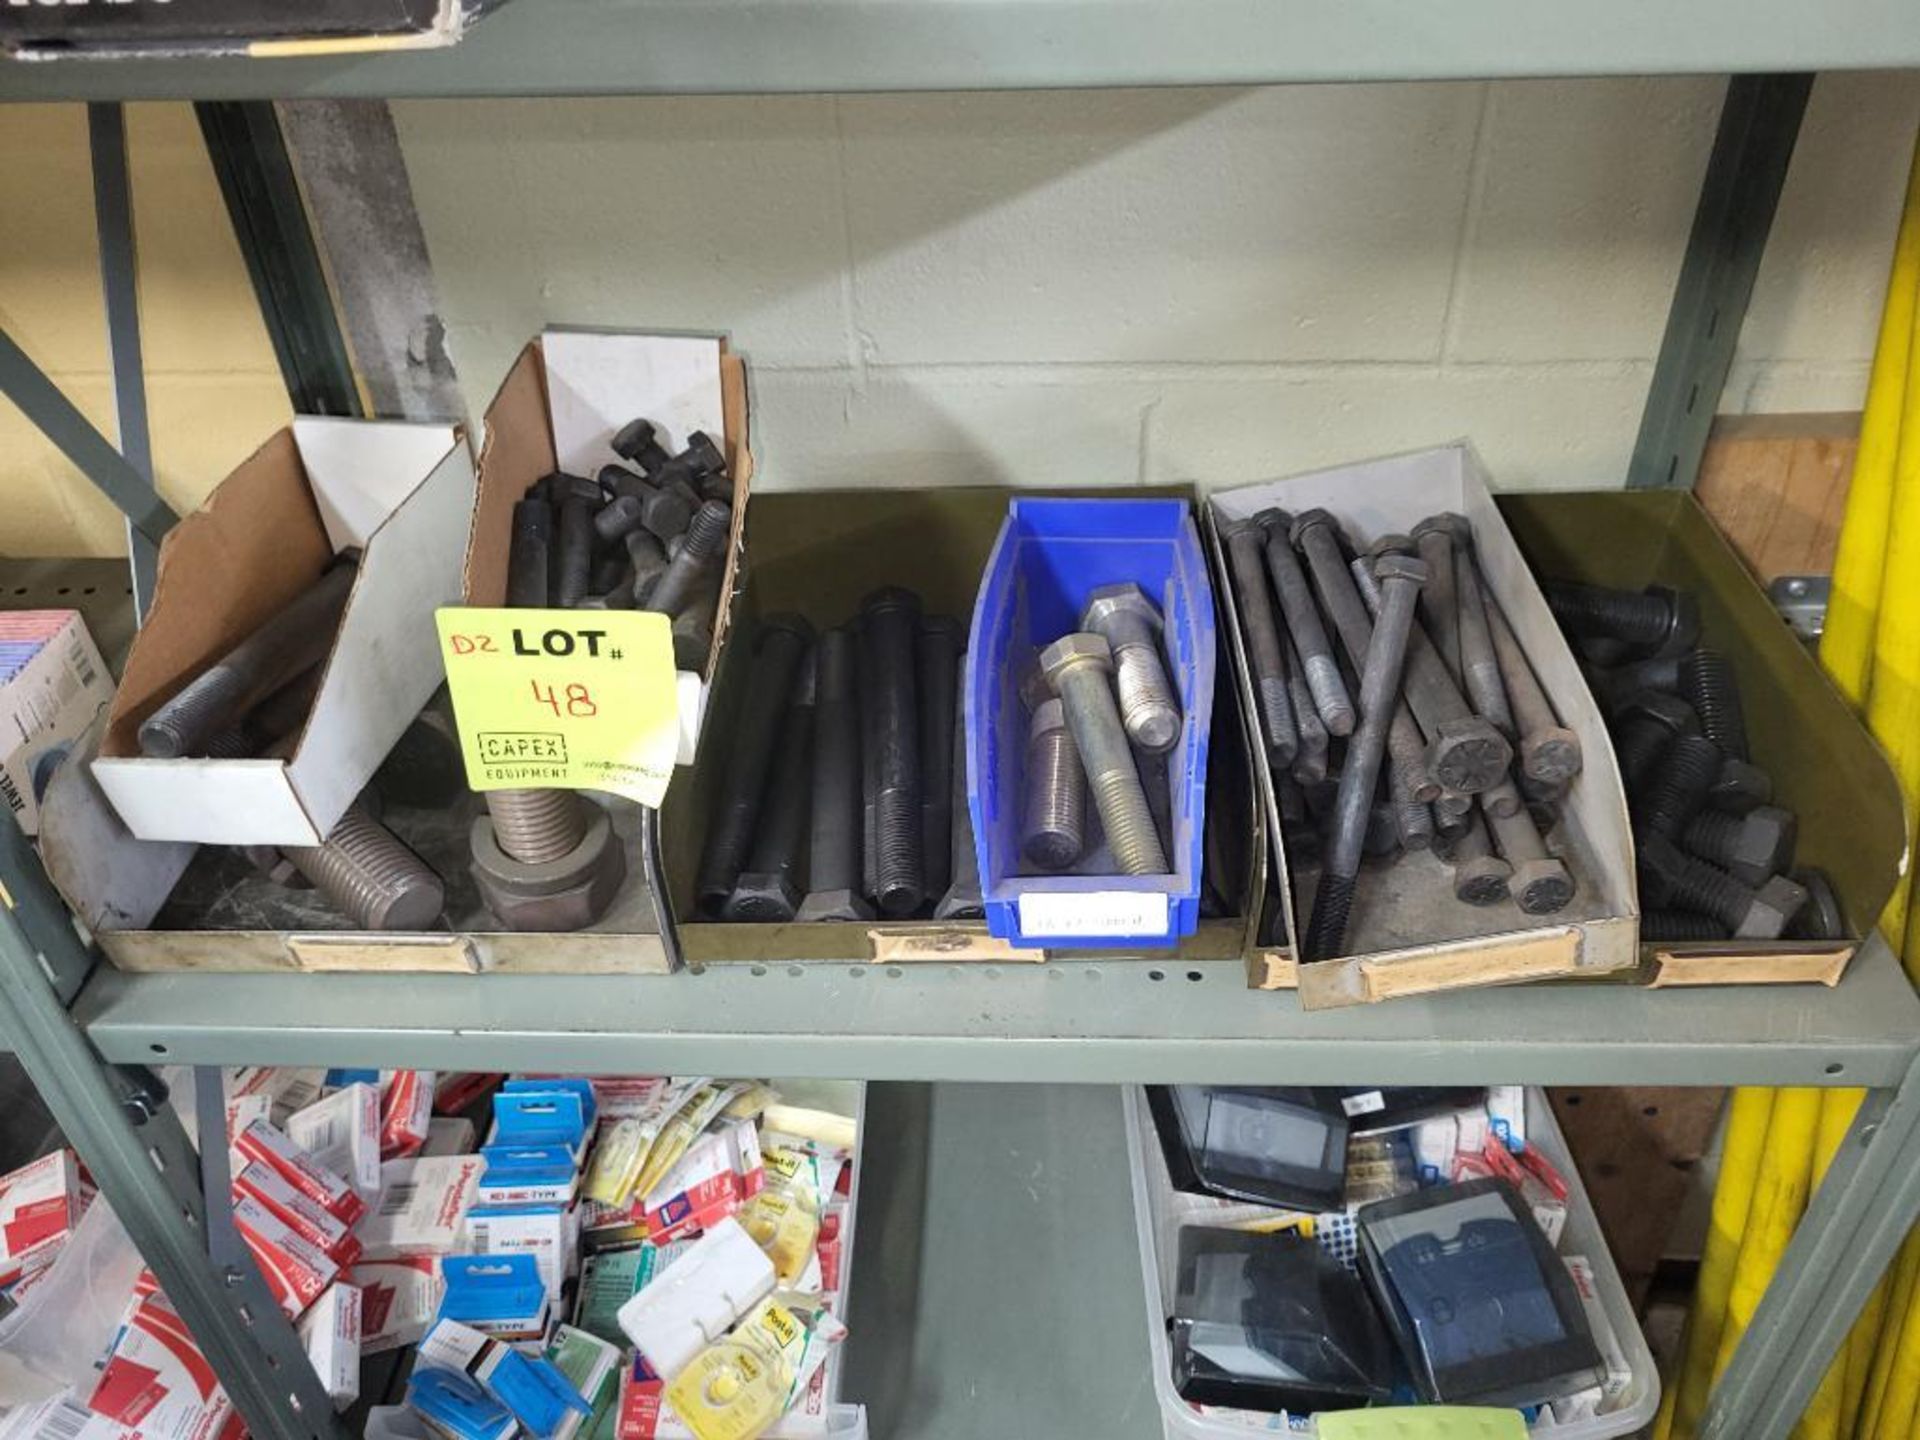 Large Quantity Of Bolts In Bins